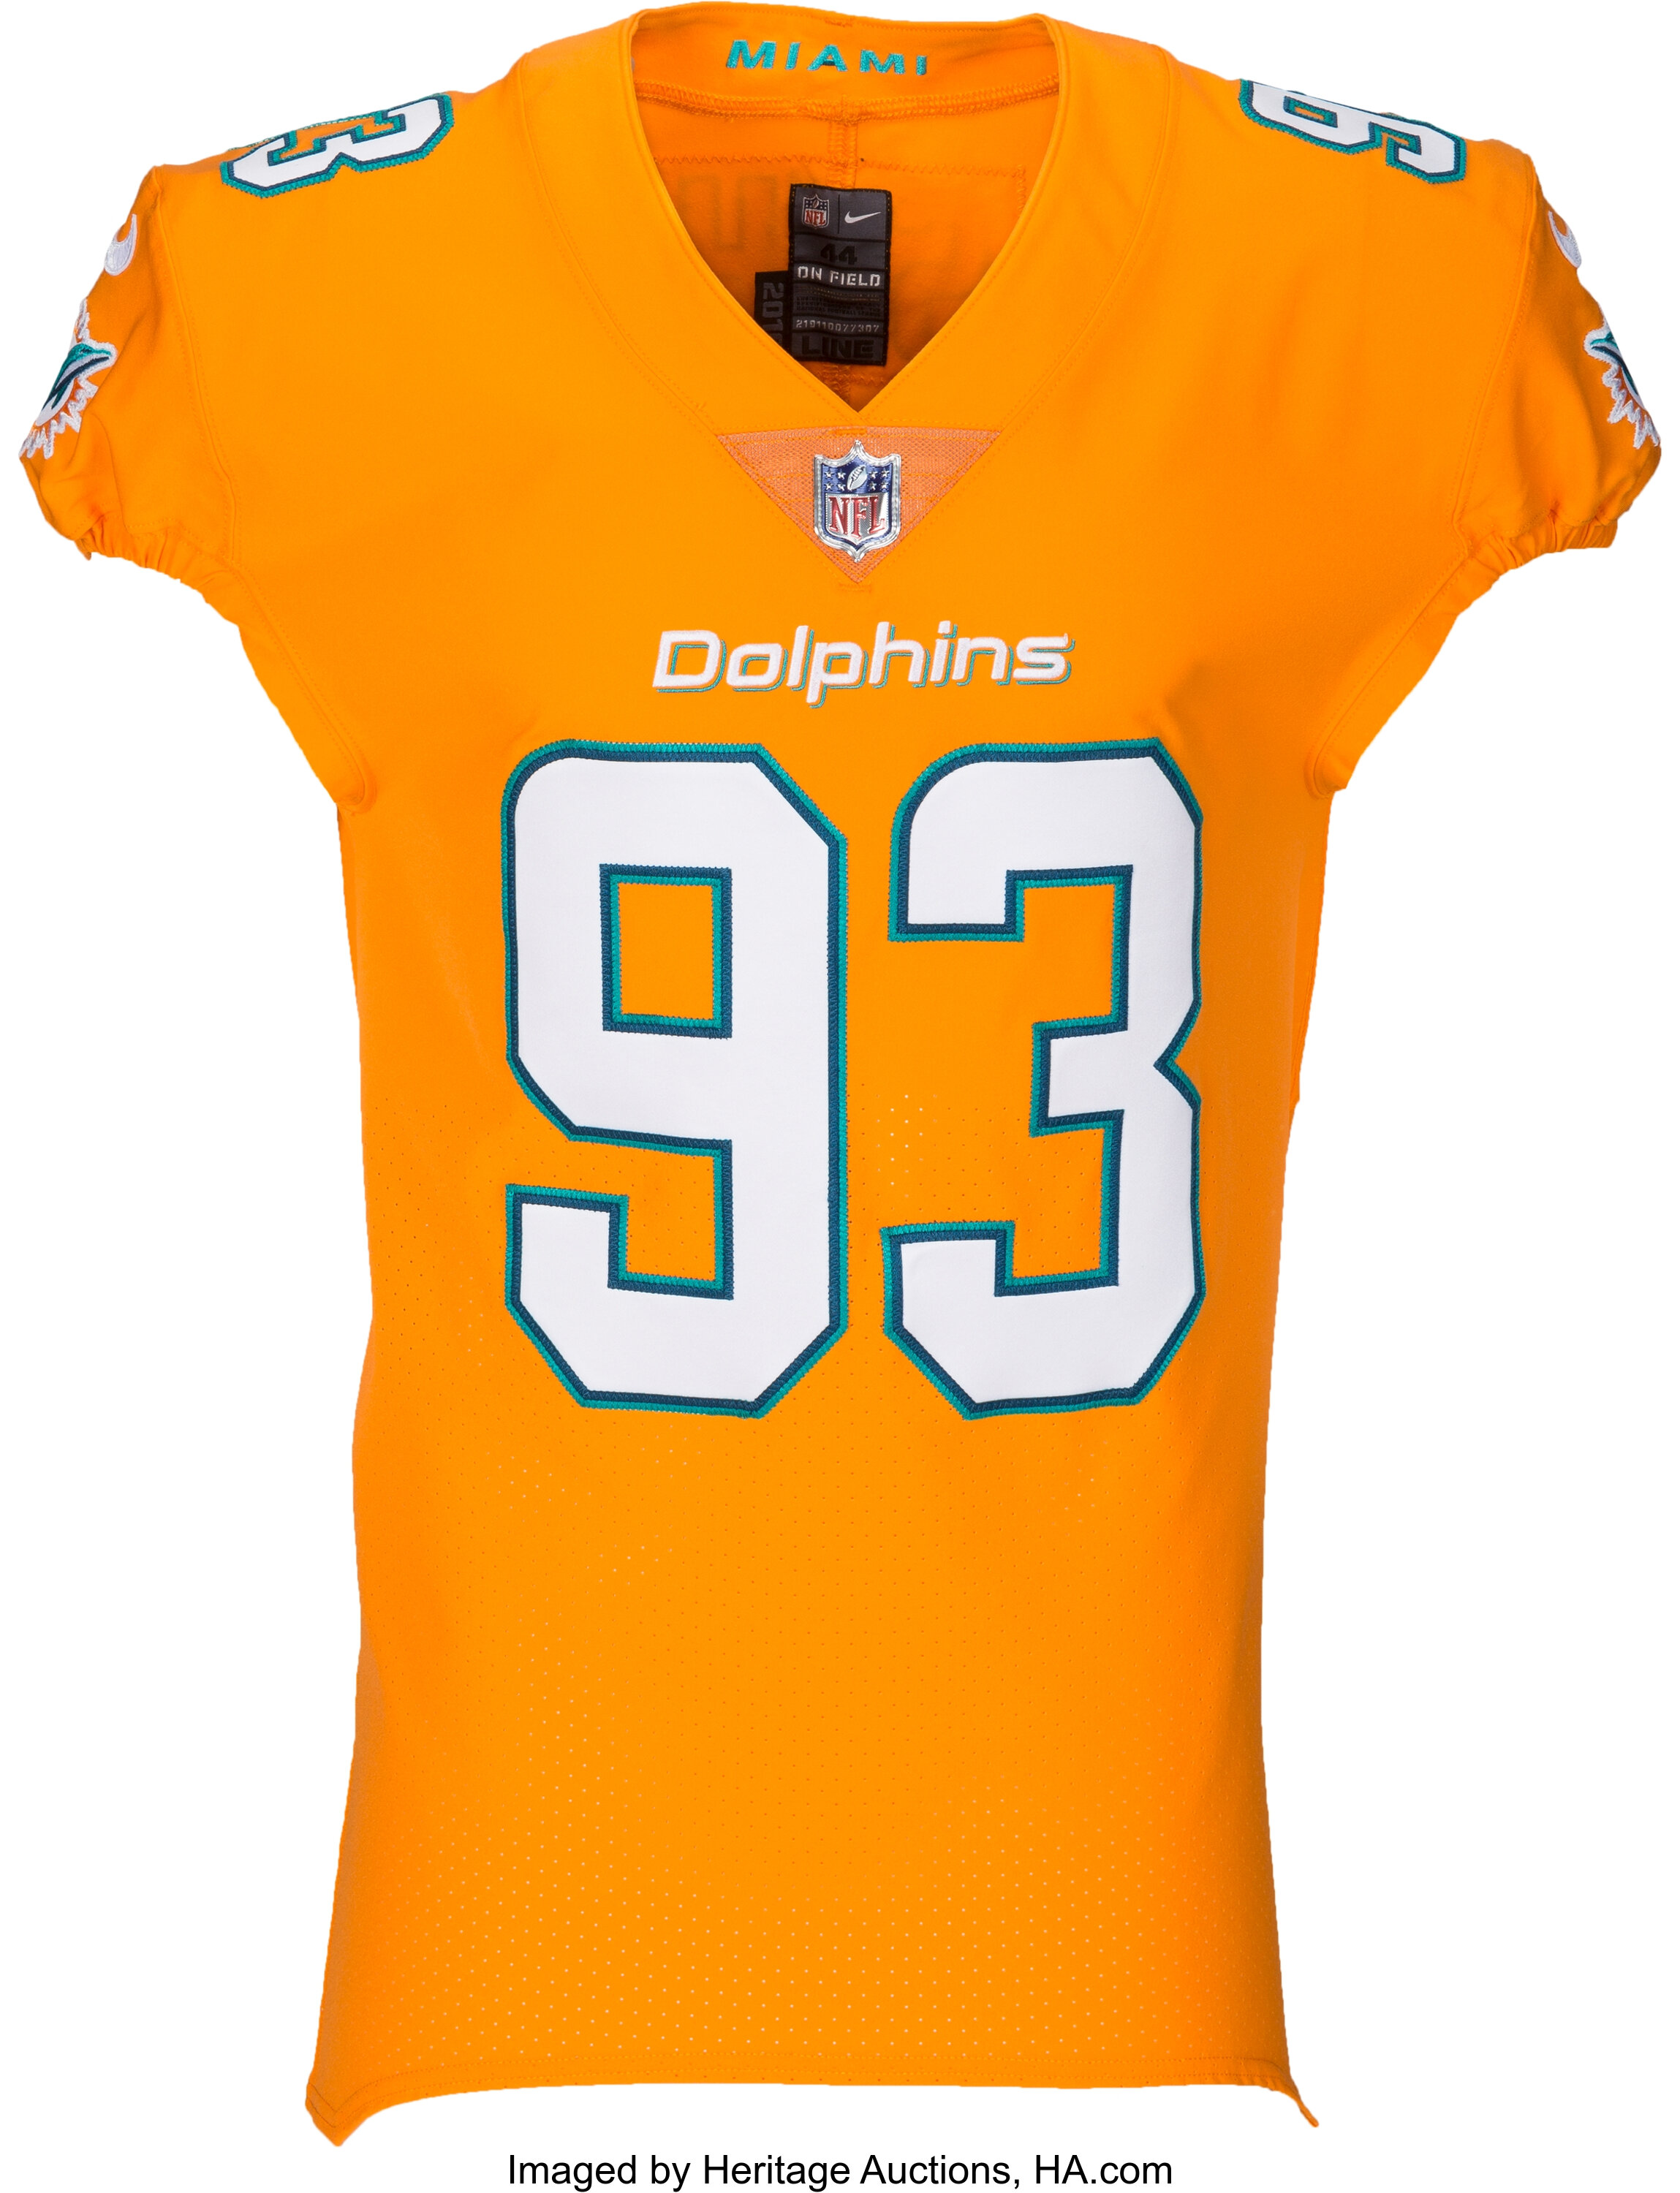 Dolphins uniform rumors for Color Rush 2016 suggest team in all orange -  The Phinsider